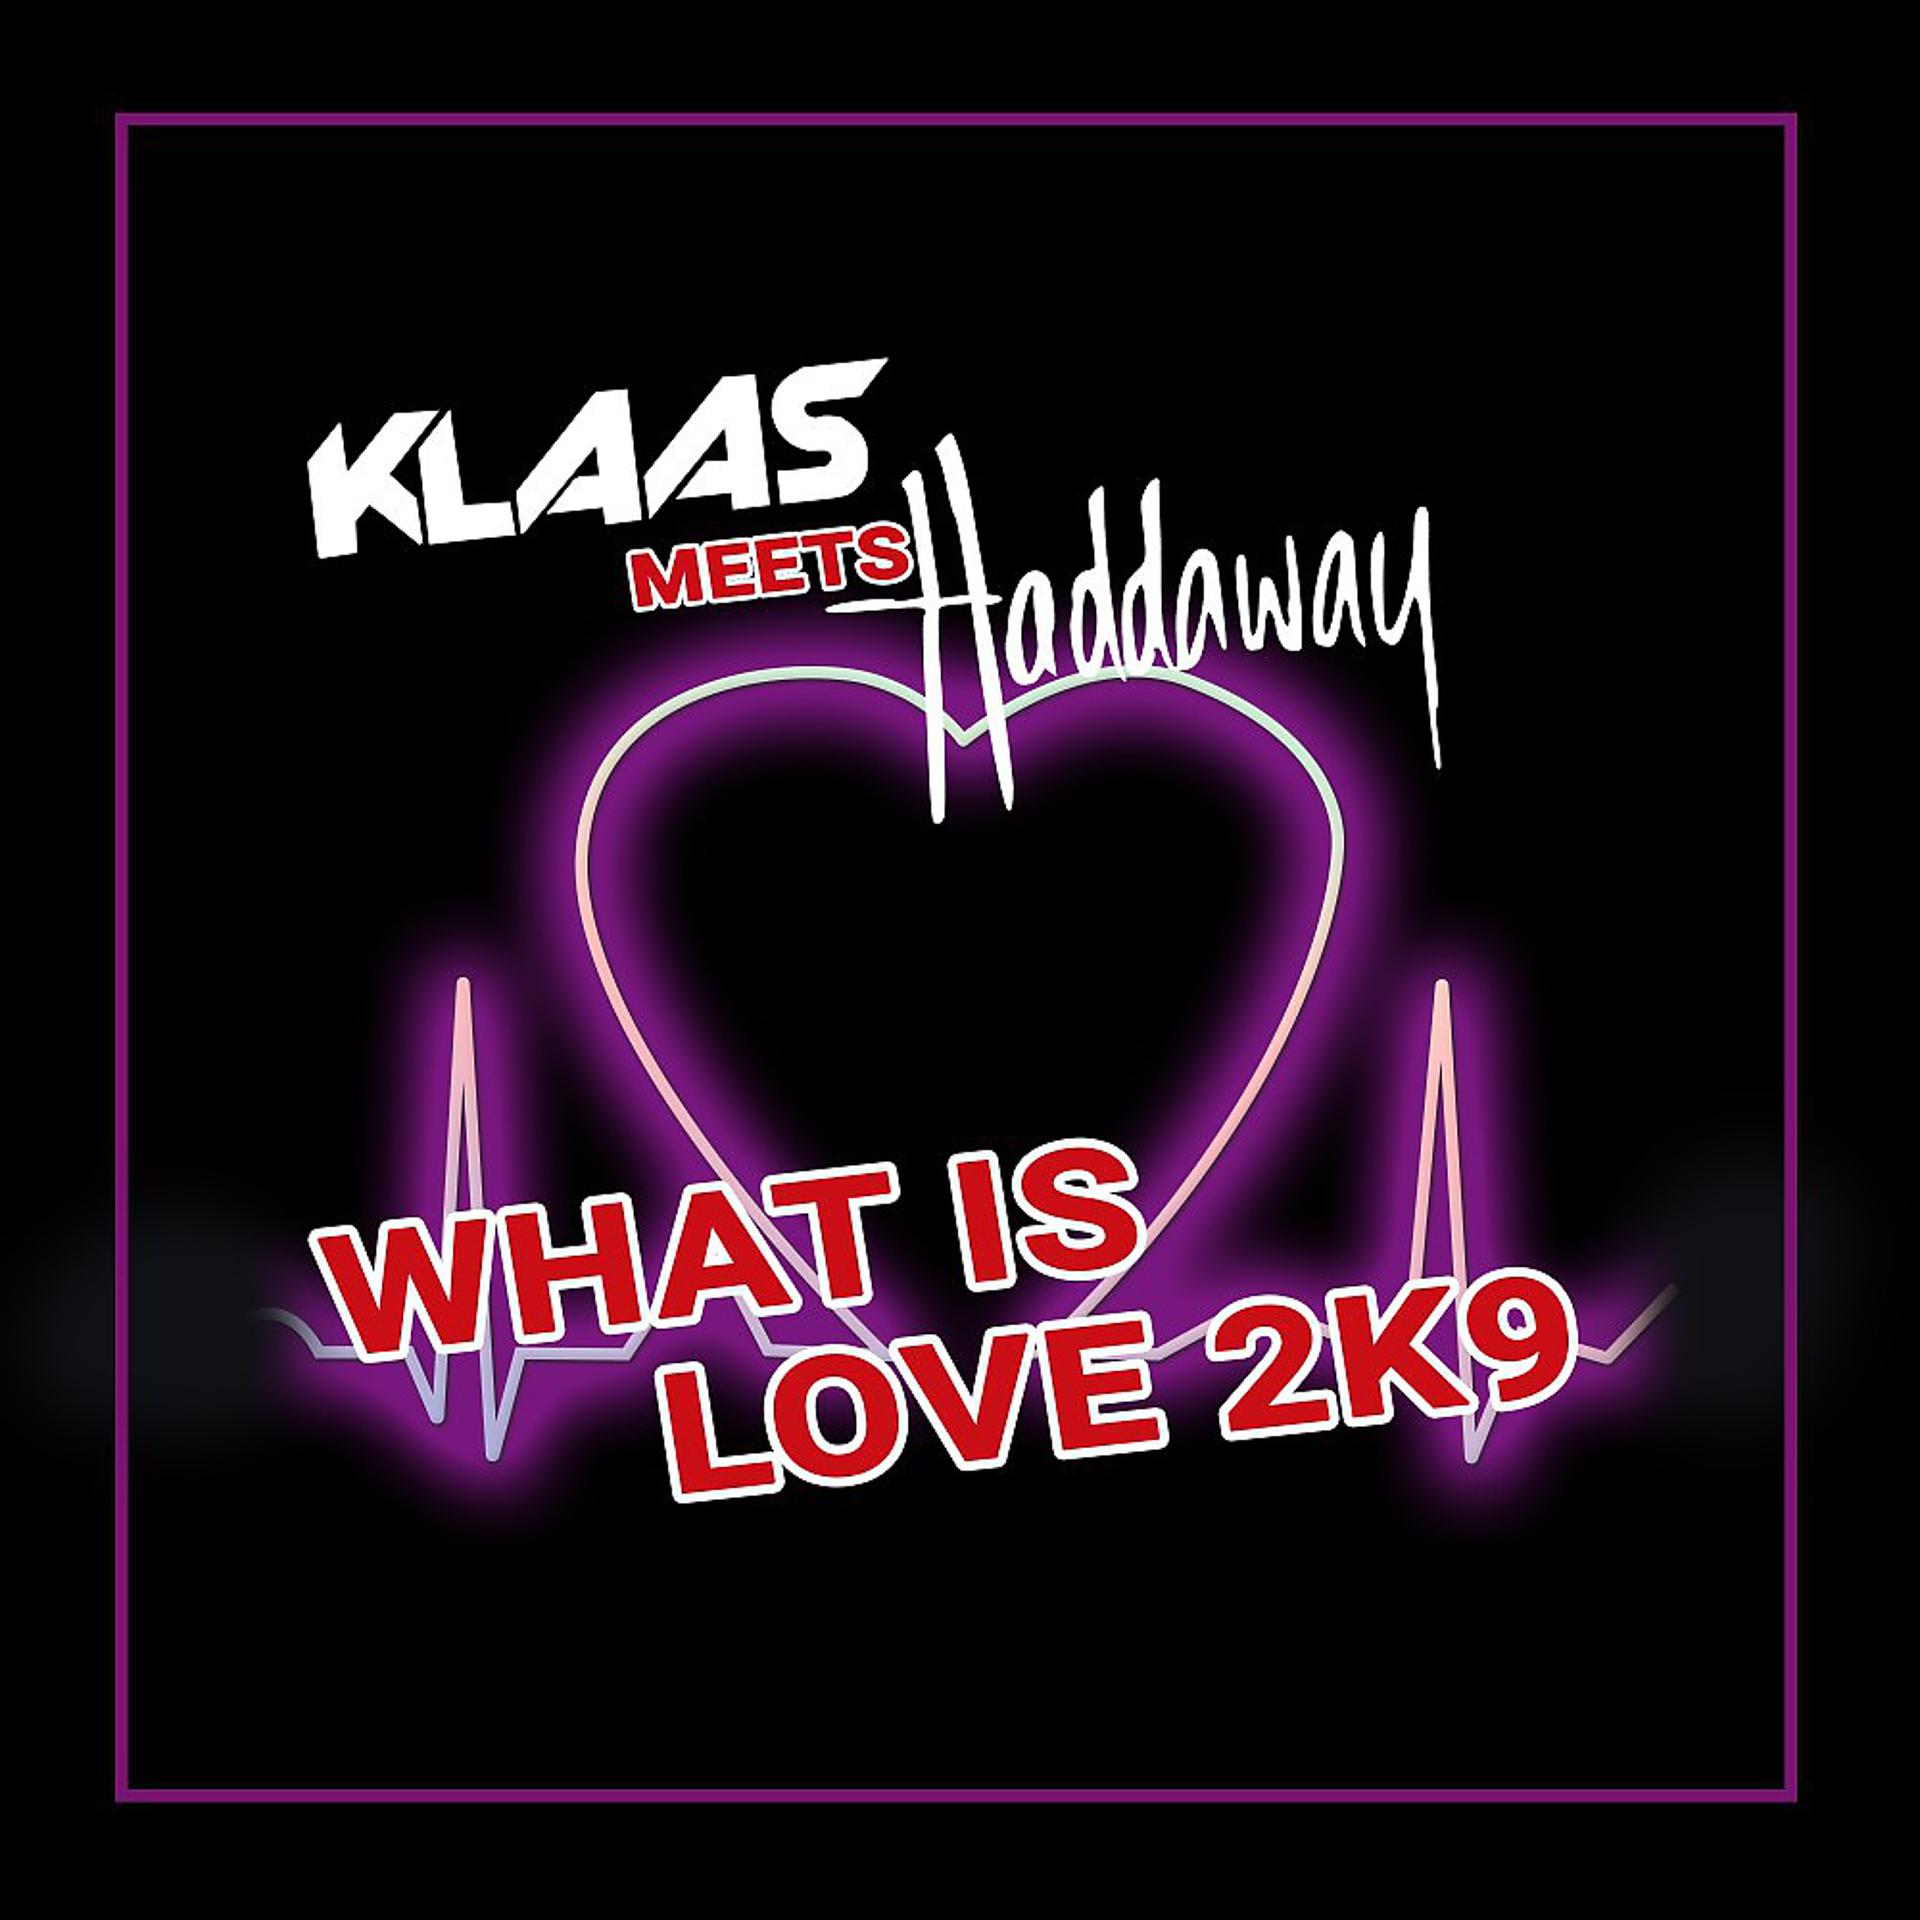 Feel only love. Haddaway-what-is-Love-2k9-Bodybangers-Remix.mp3. What is Love Remix. Don't leave me this way Klaas. Klaas the way.